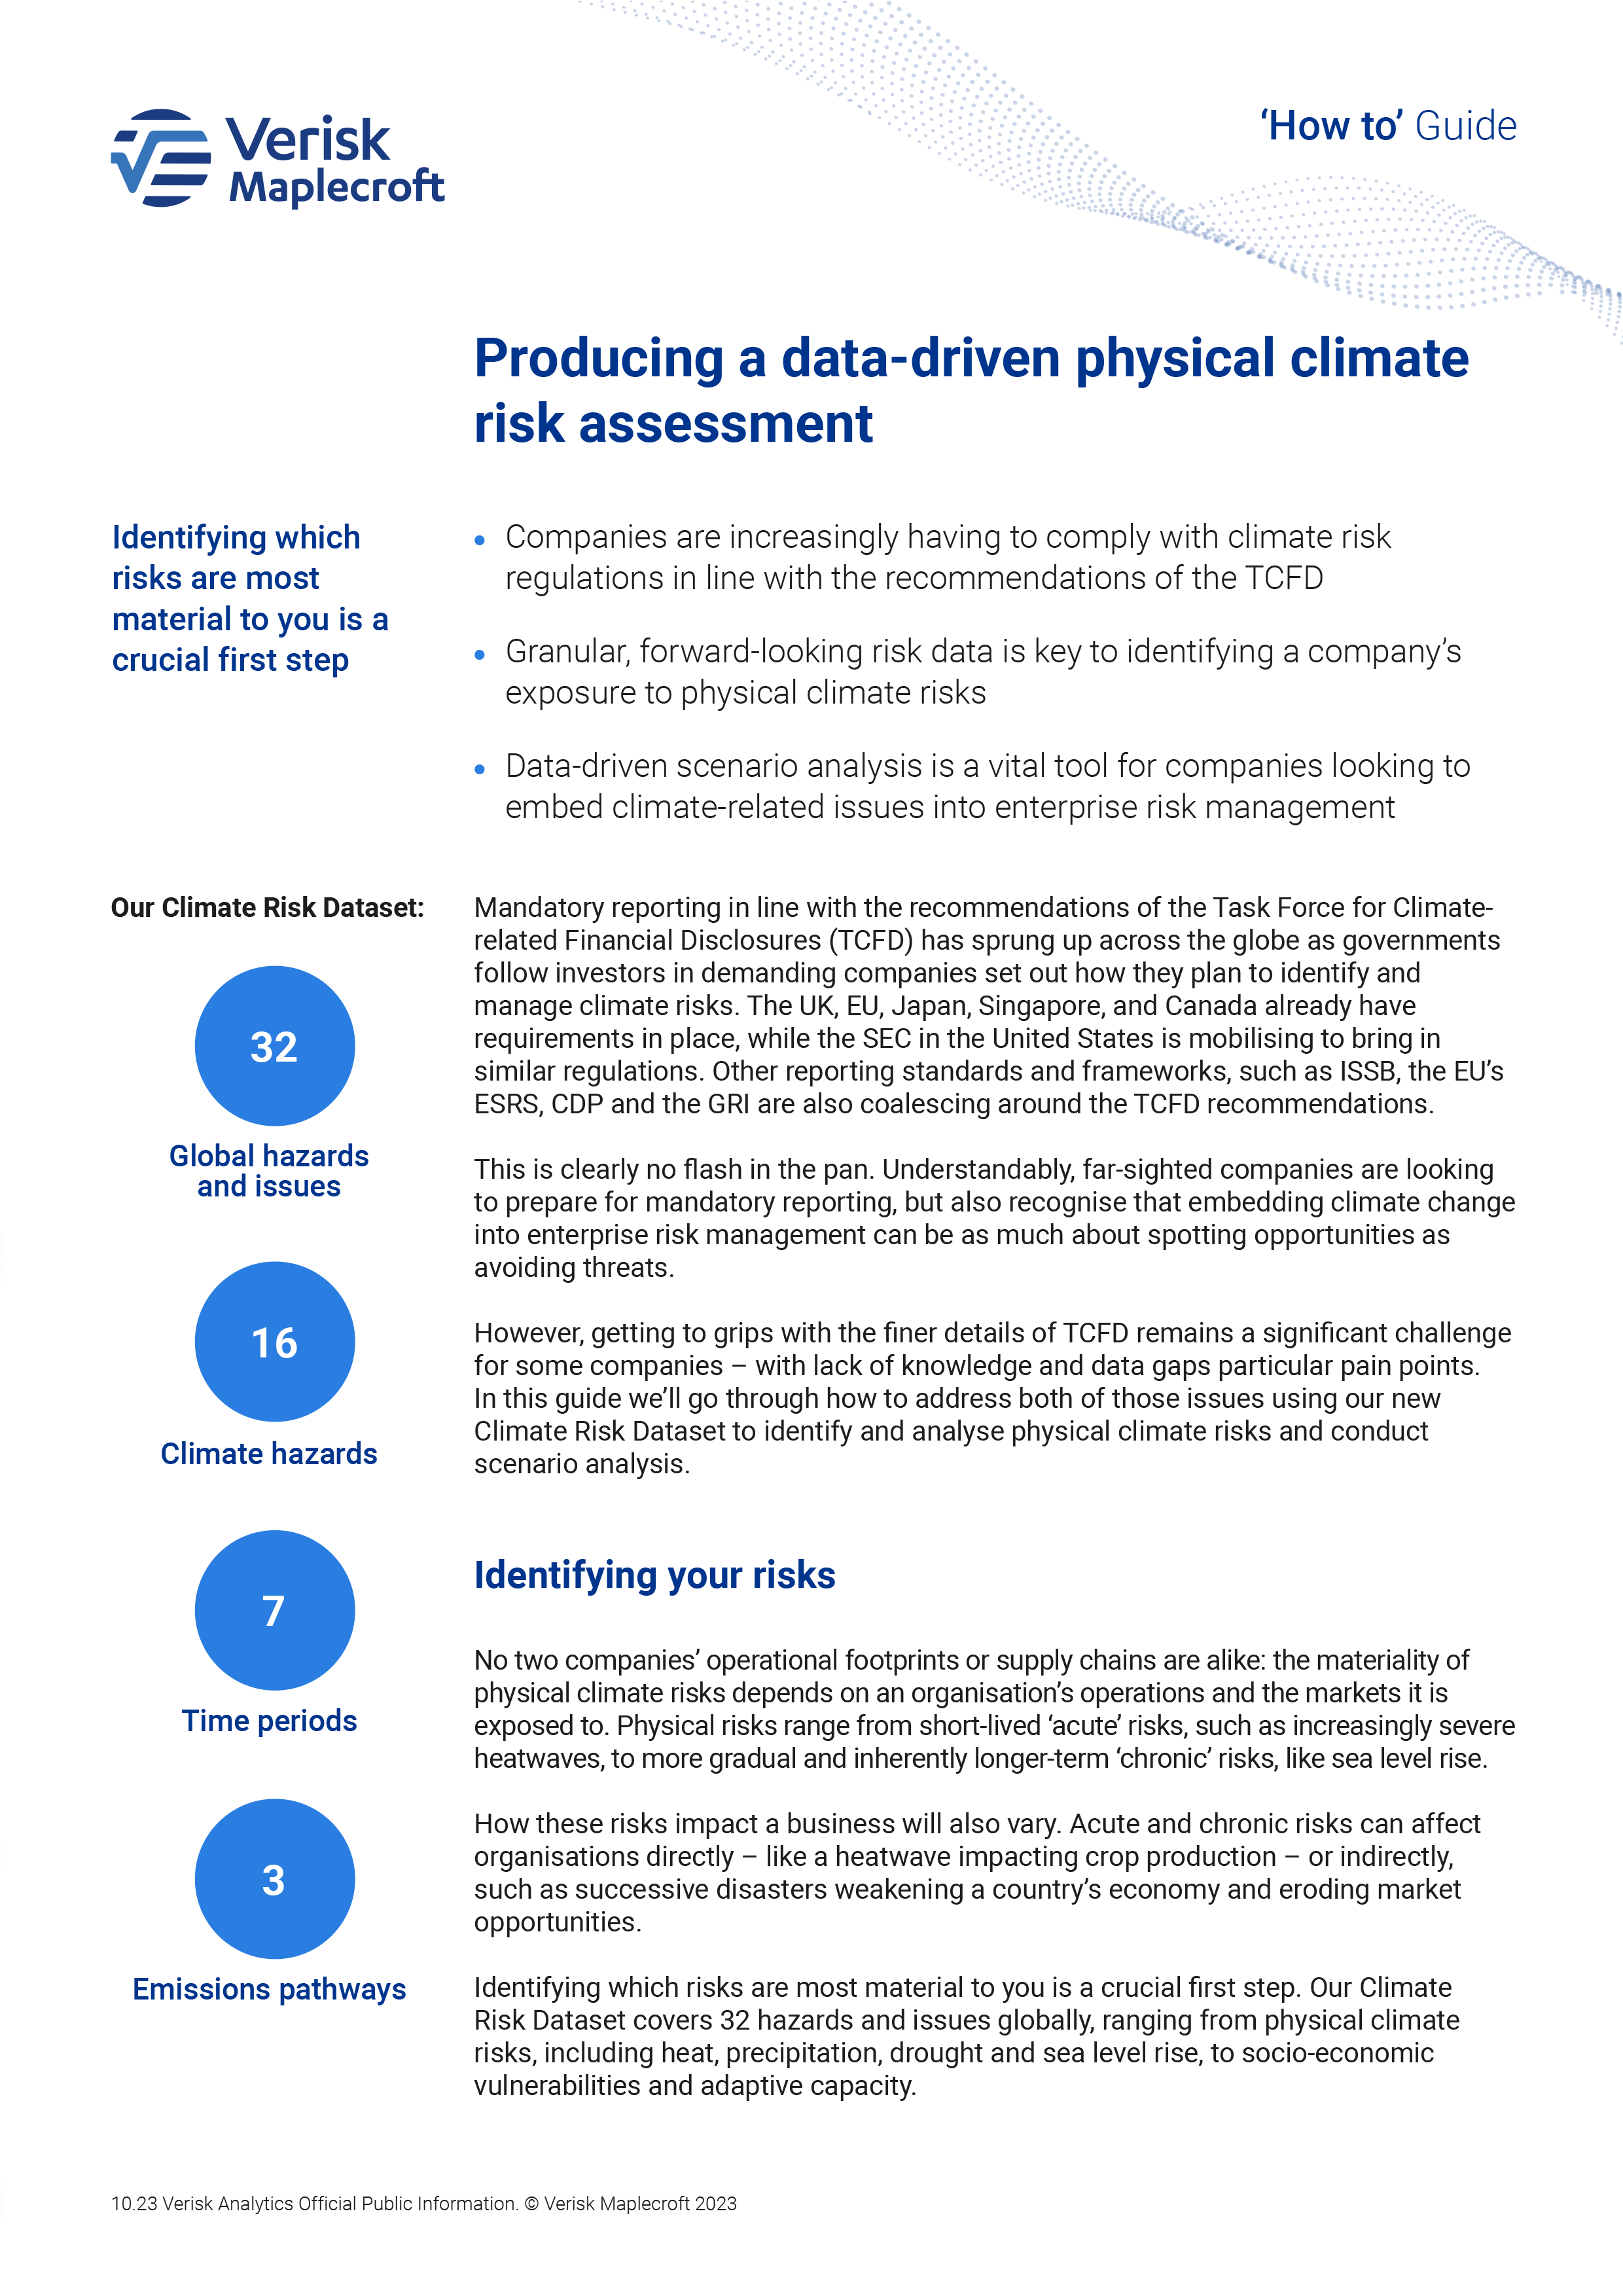 Guide cover - Producing a data-driven physical climate risk assessment